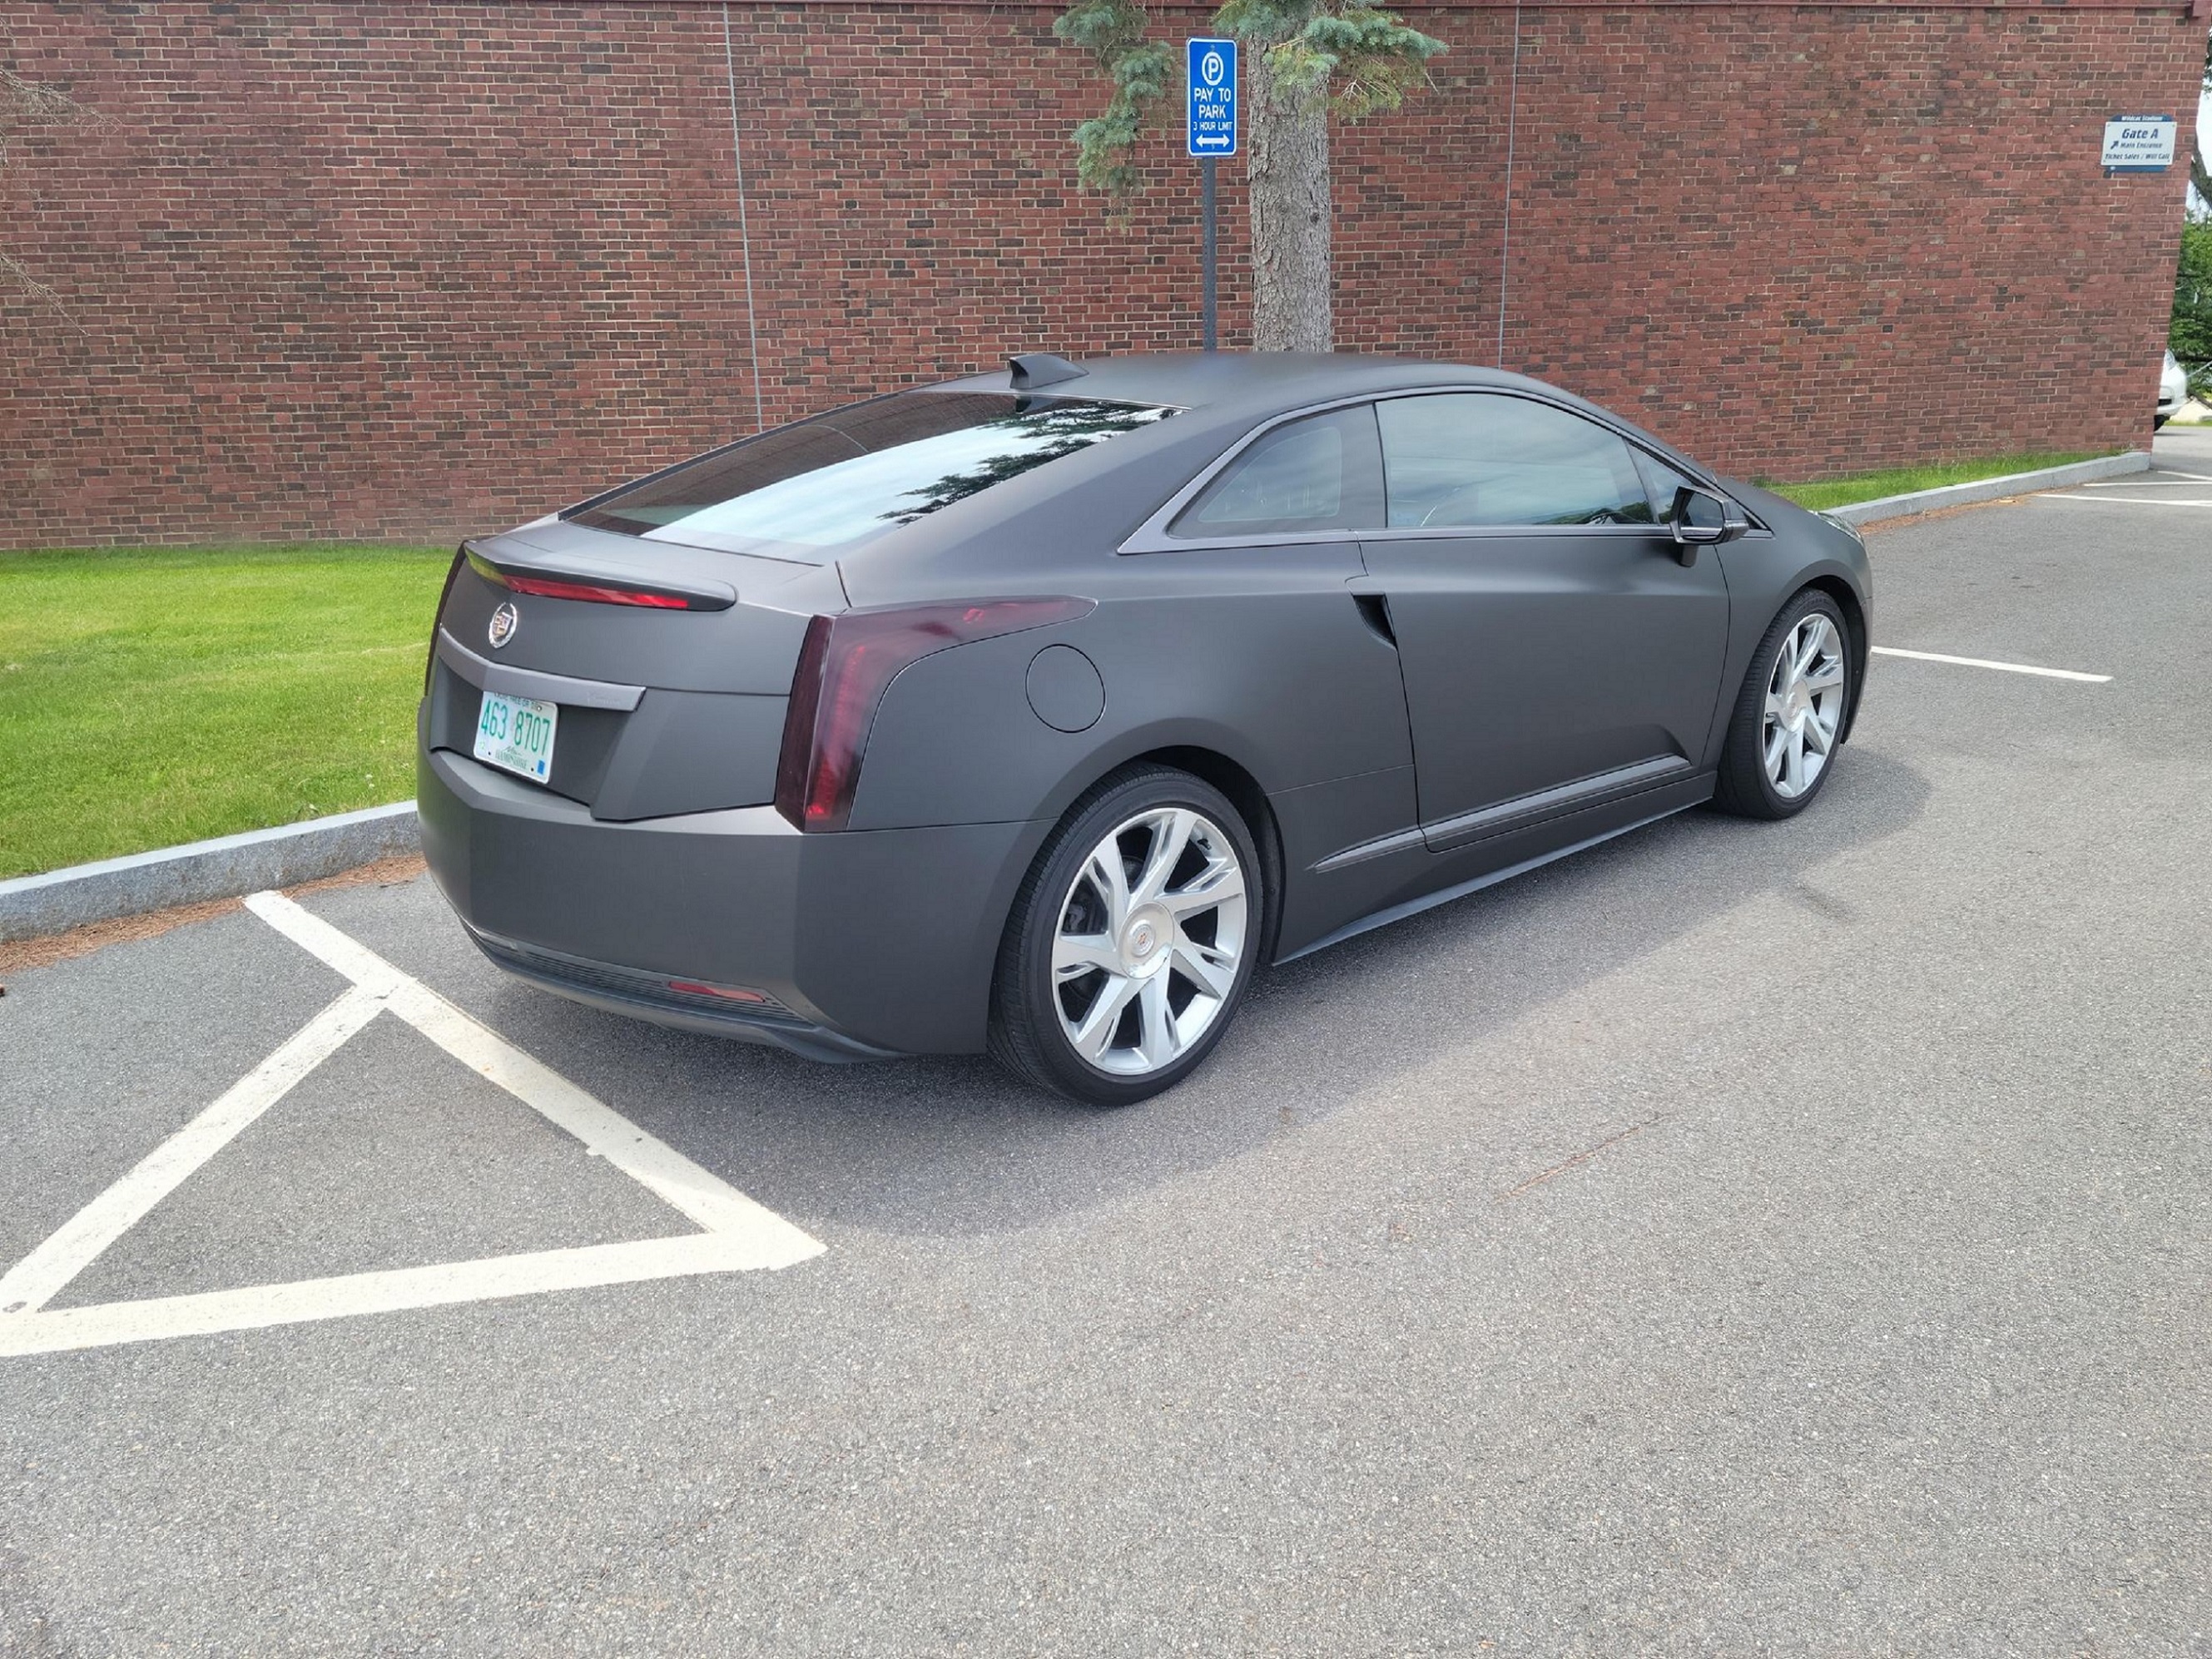 The rear 3/4 view of a 2014 Cadillac ELR wrapped in black in a parking lot